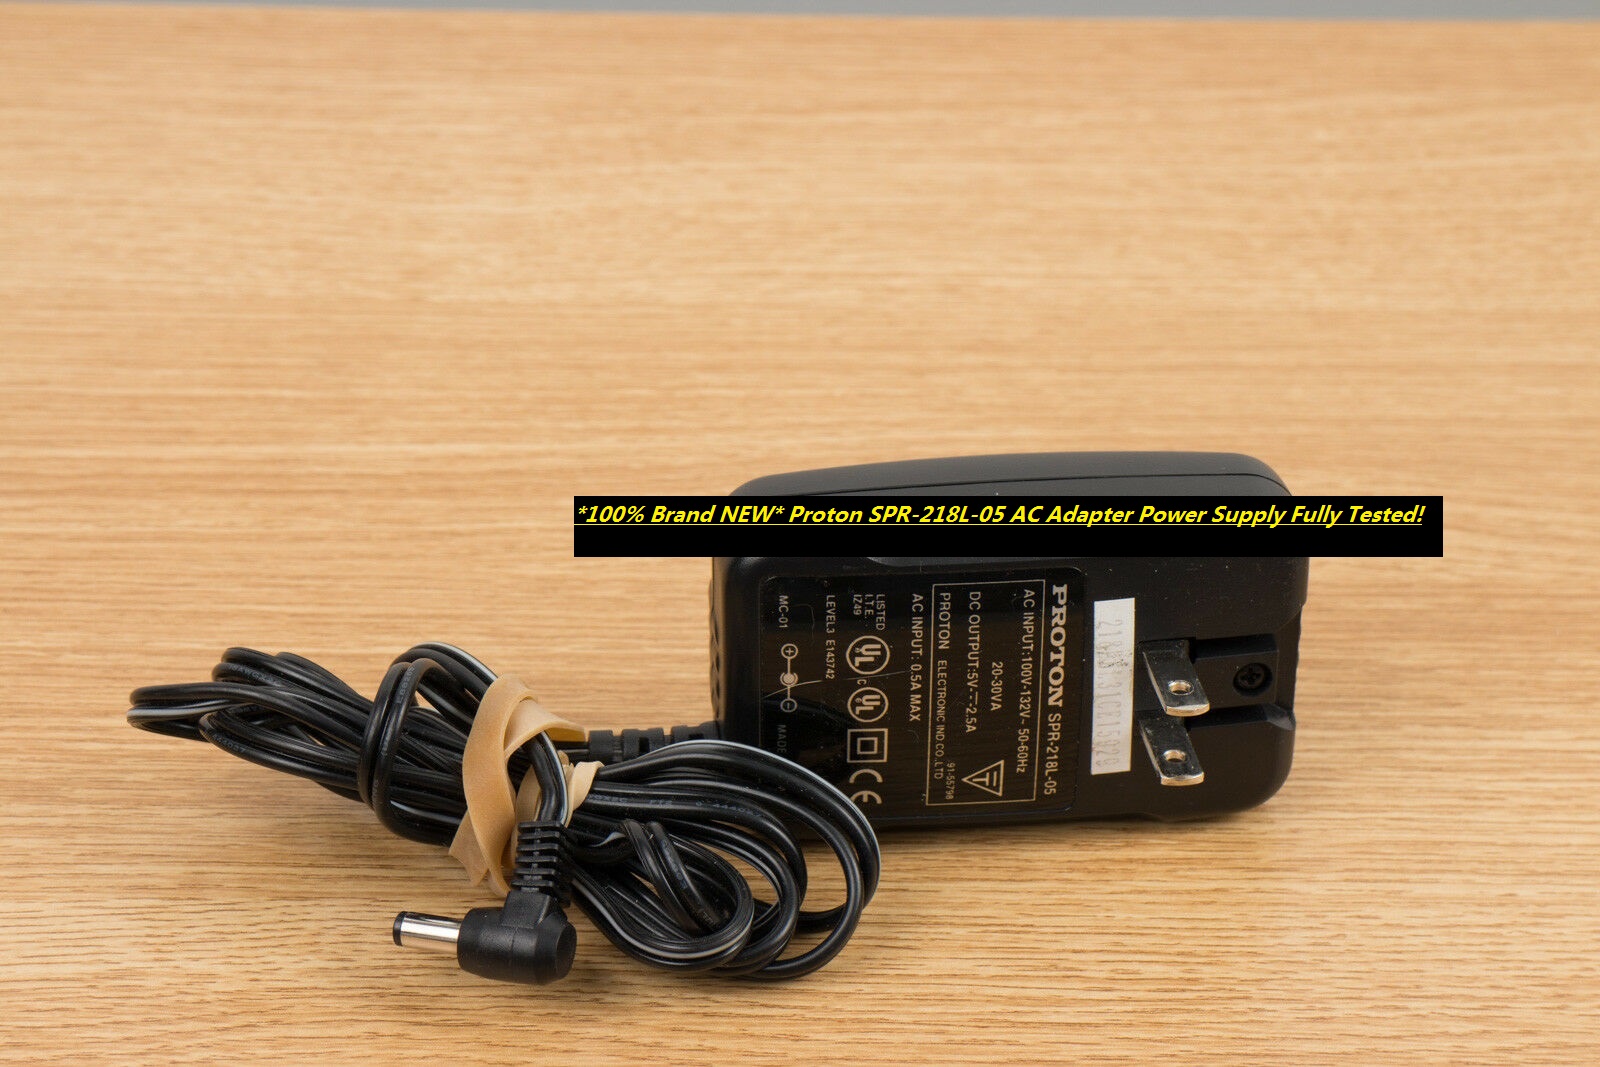 *100% Brand NEW* Proton SPR-218L-05 AC Adapter Power Supply Fully Tested!